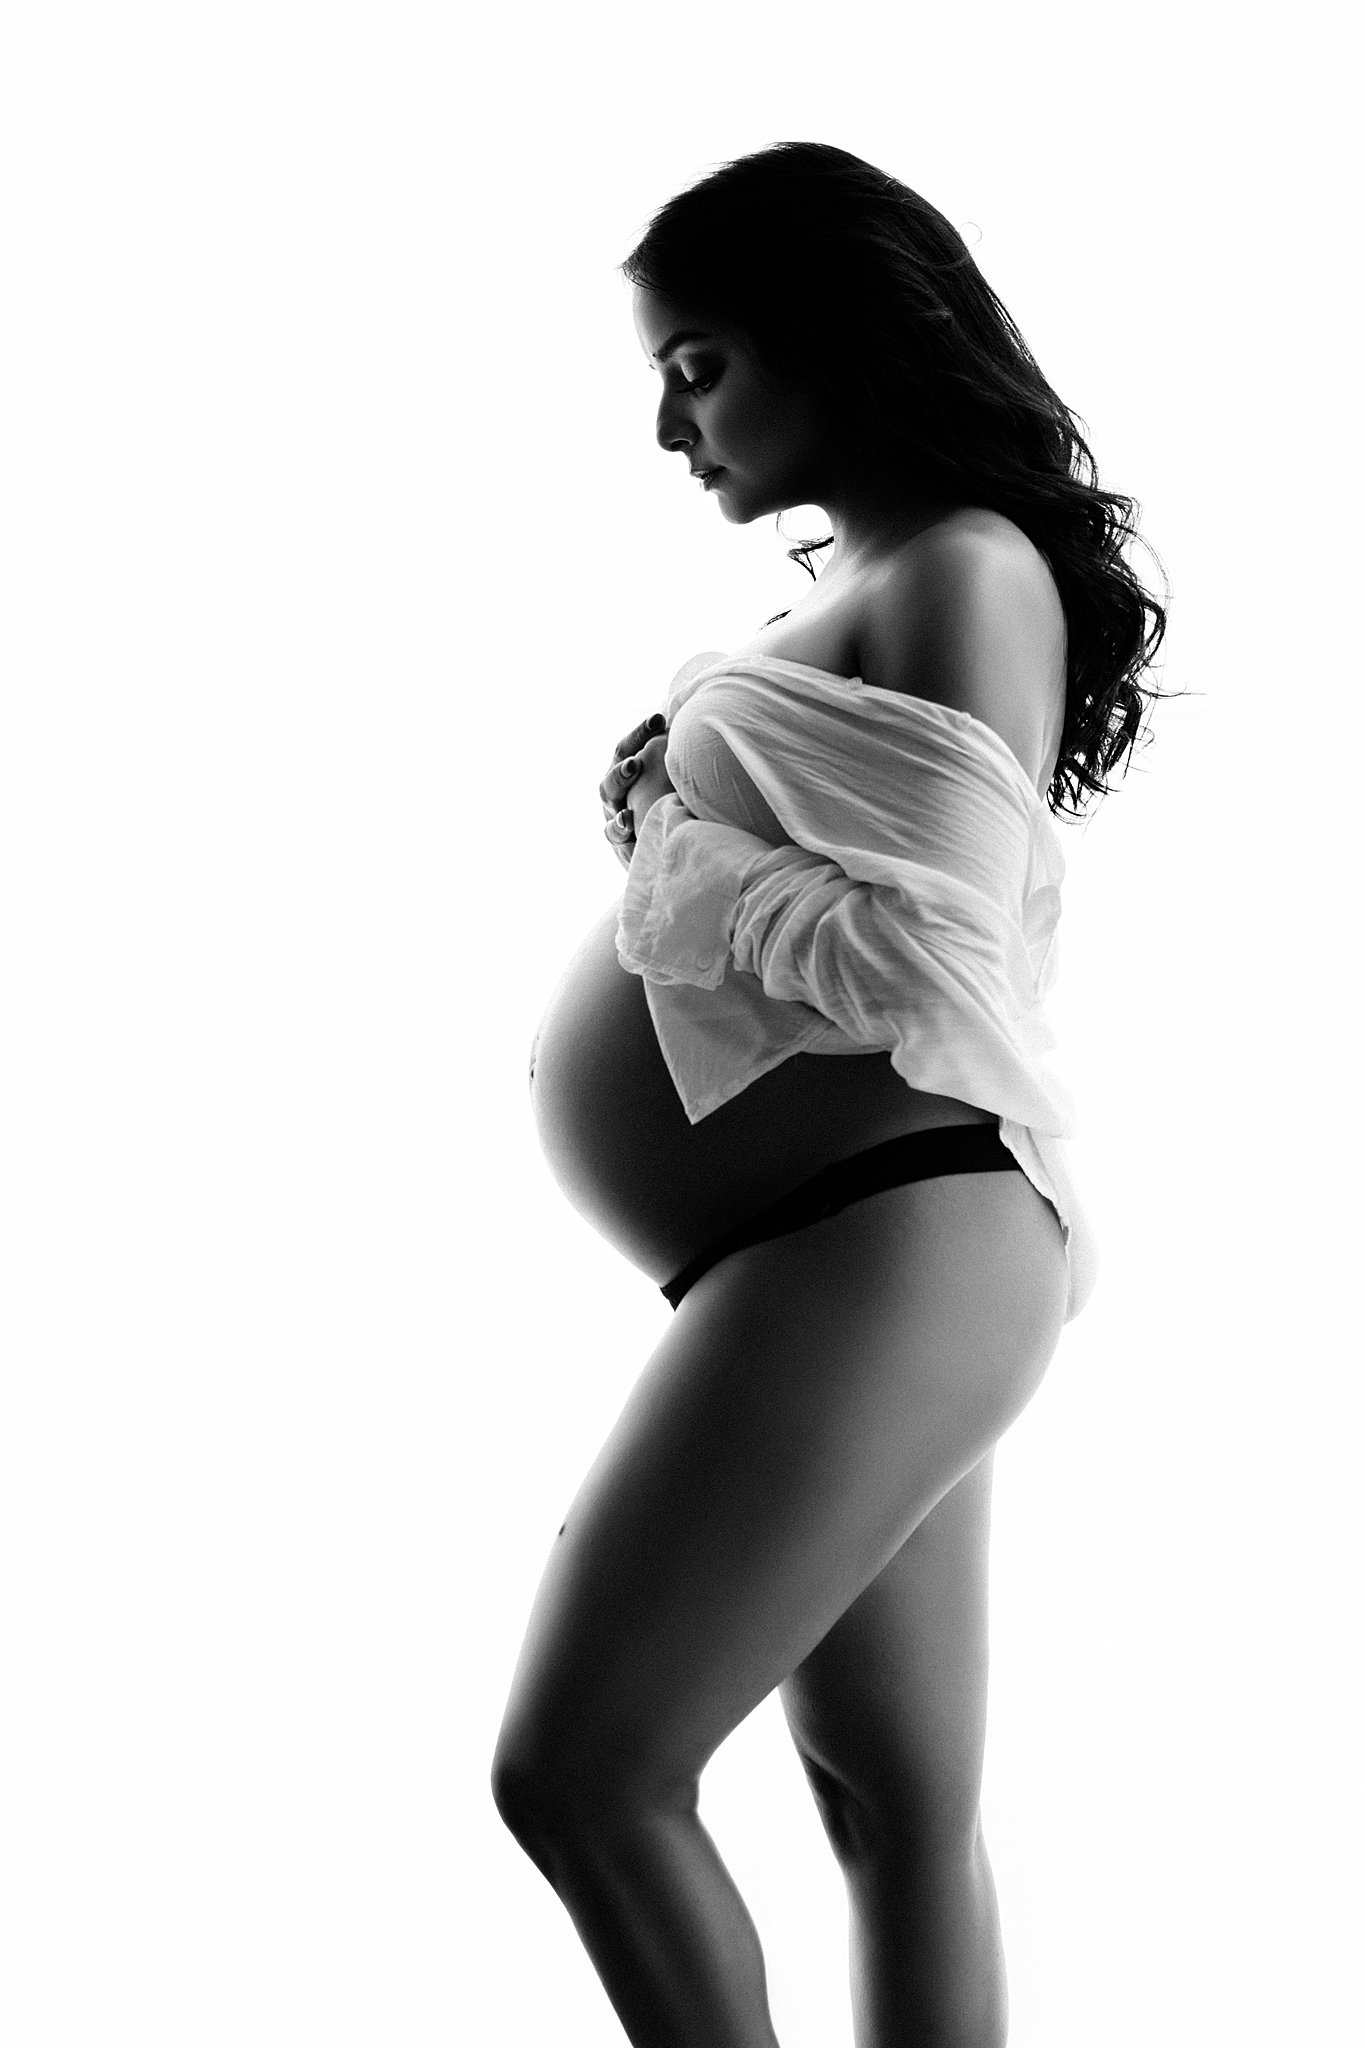 A mother to be wears a white button down shirt and black underwear in a studio looking down at her bump